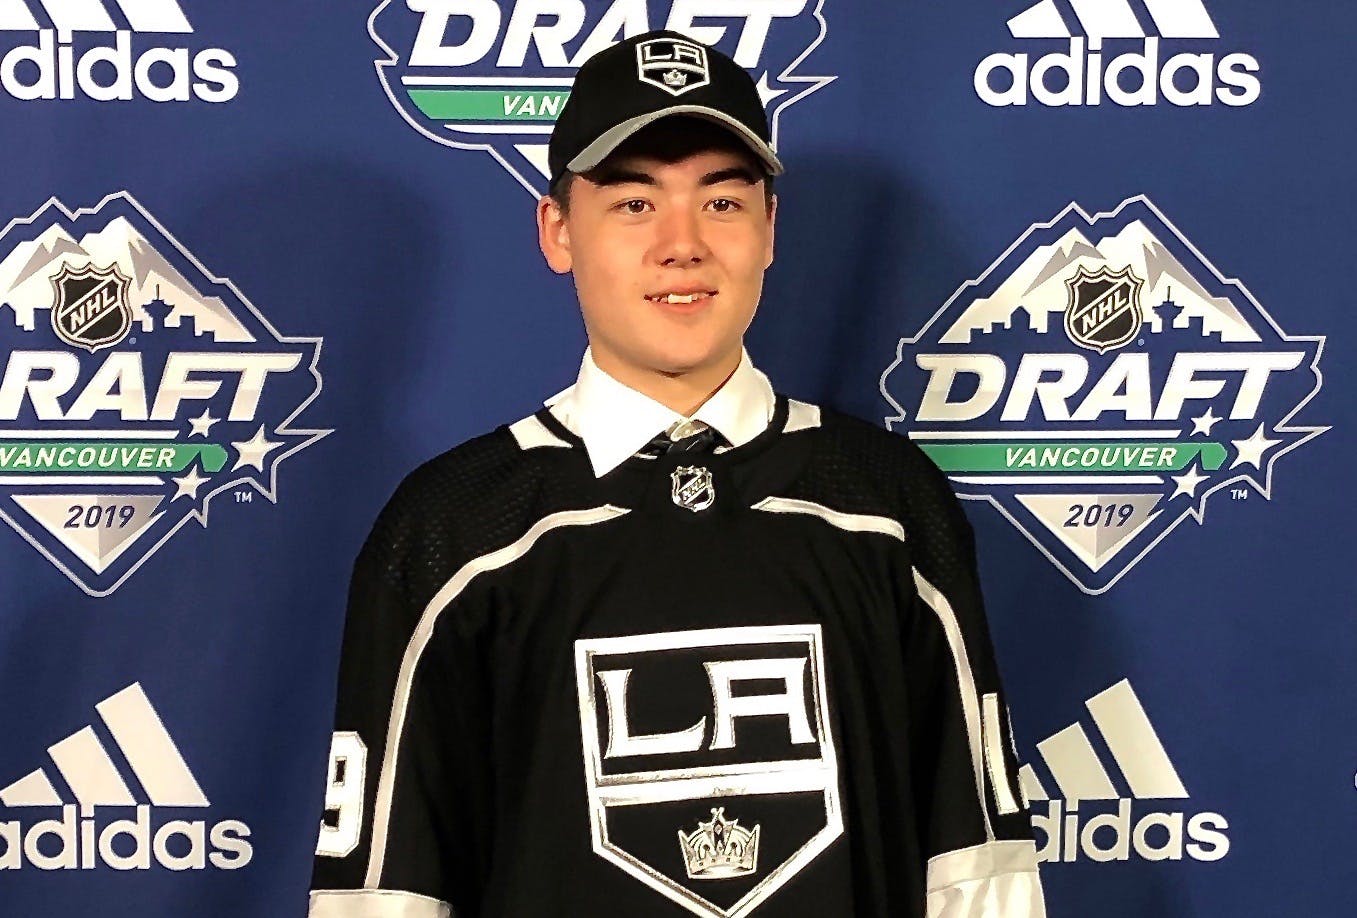 Jordan Spence of Cornwall, who was drafted by the Los Angeles Kings in the fourth round, 95th overall, of the 2019 National Hockey League Entry Draft, made his NHL debut on March 10, 2022.